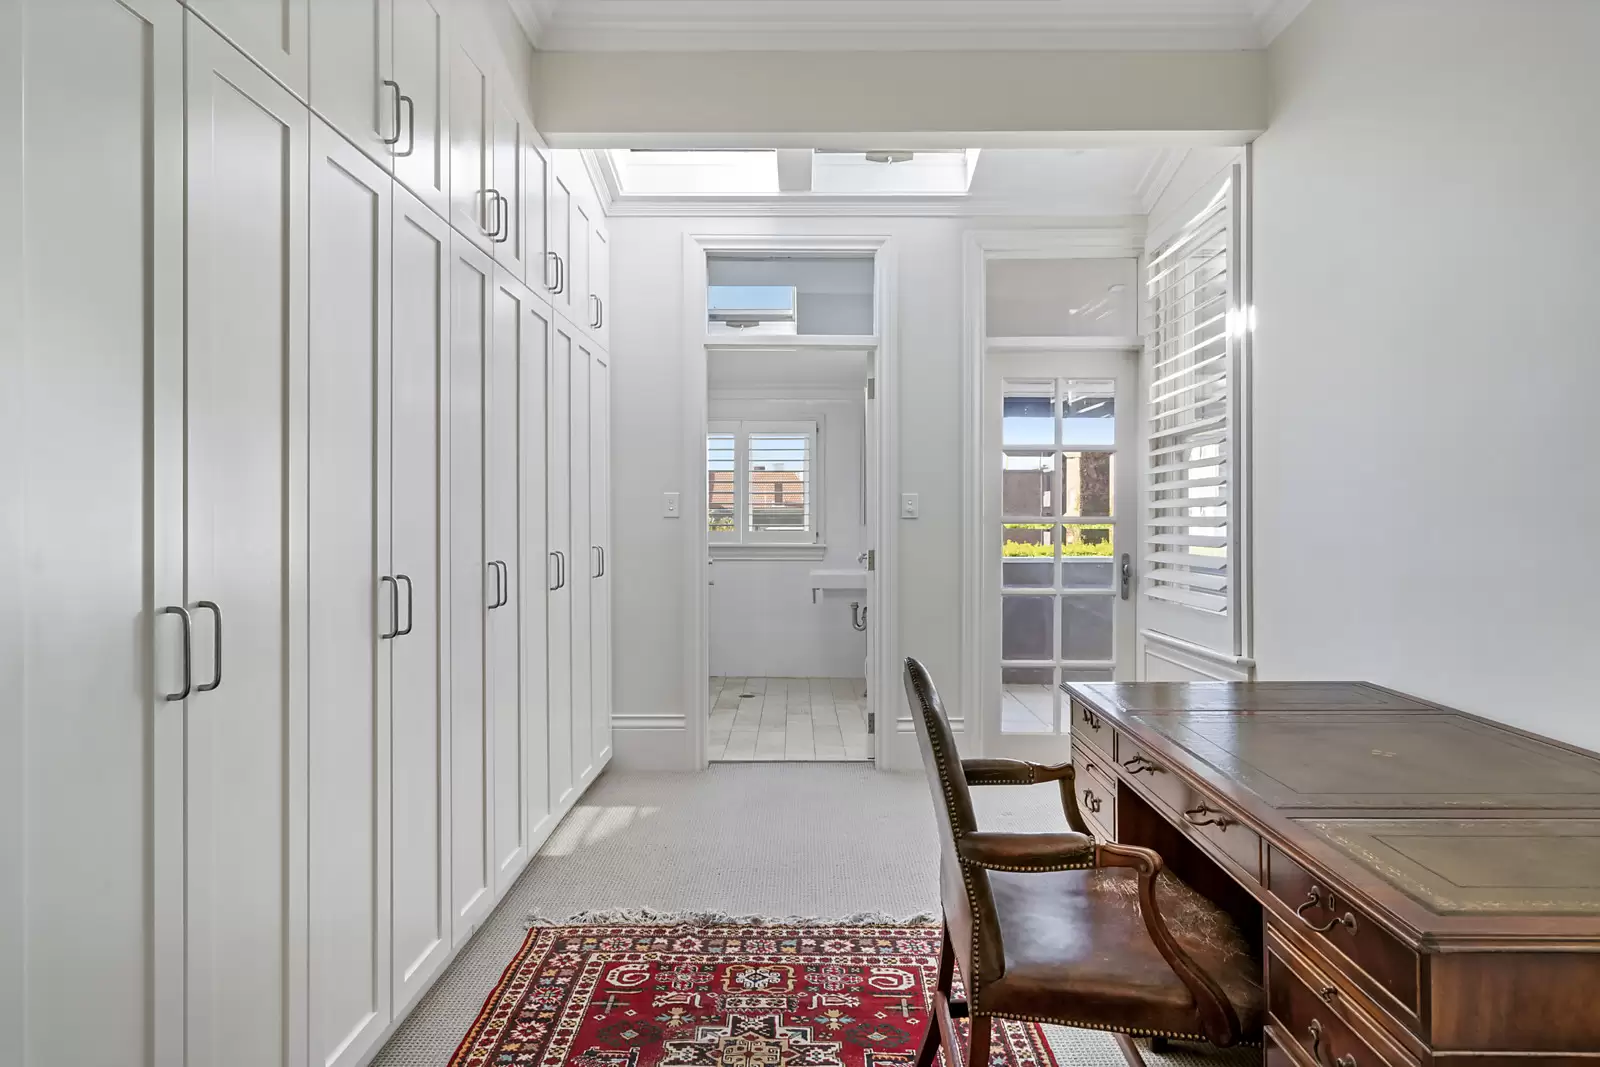 Photo #11: 198 Queen Street, Woollahra - Auction by Sydney Sotheby's International Realty